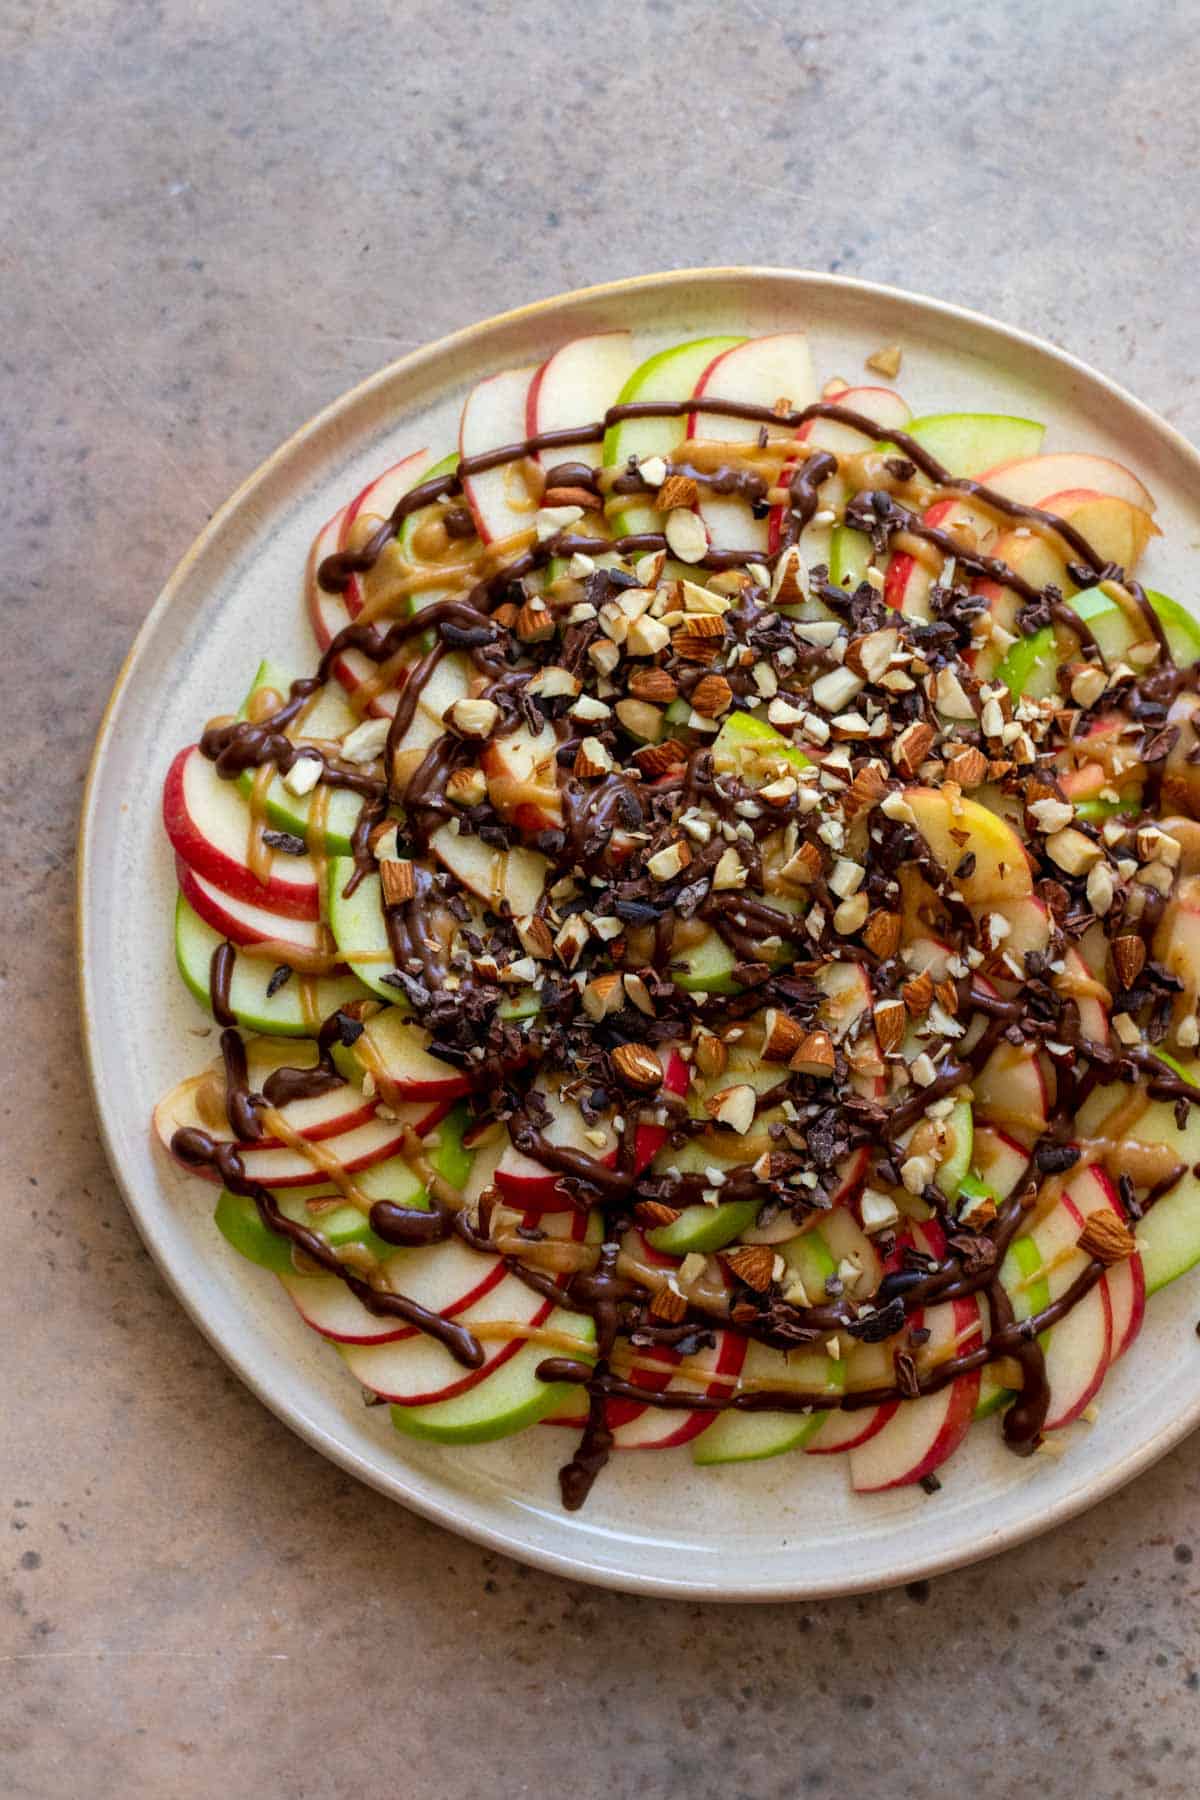 Nachos sprinkled with crushed nuts and cacao nibs.